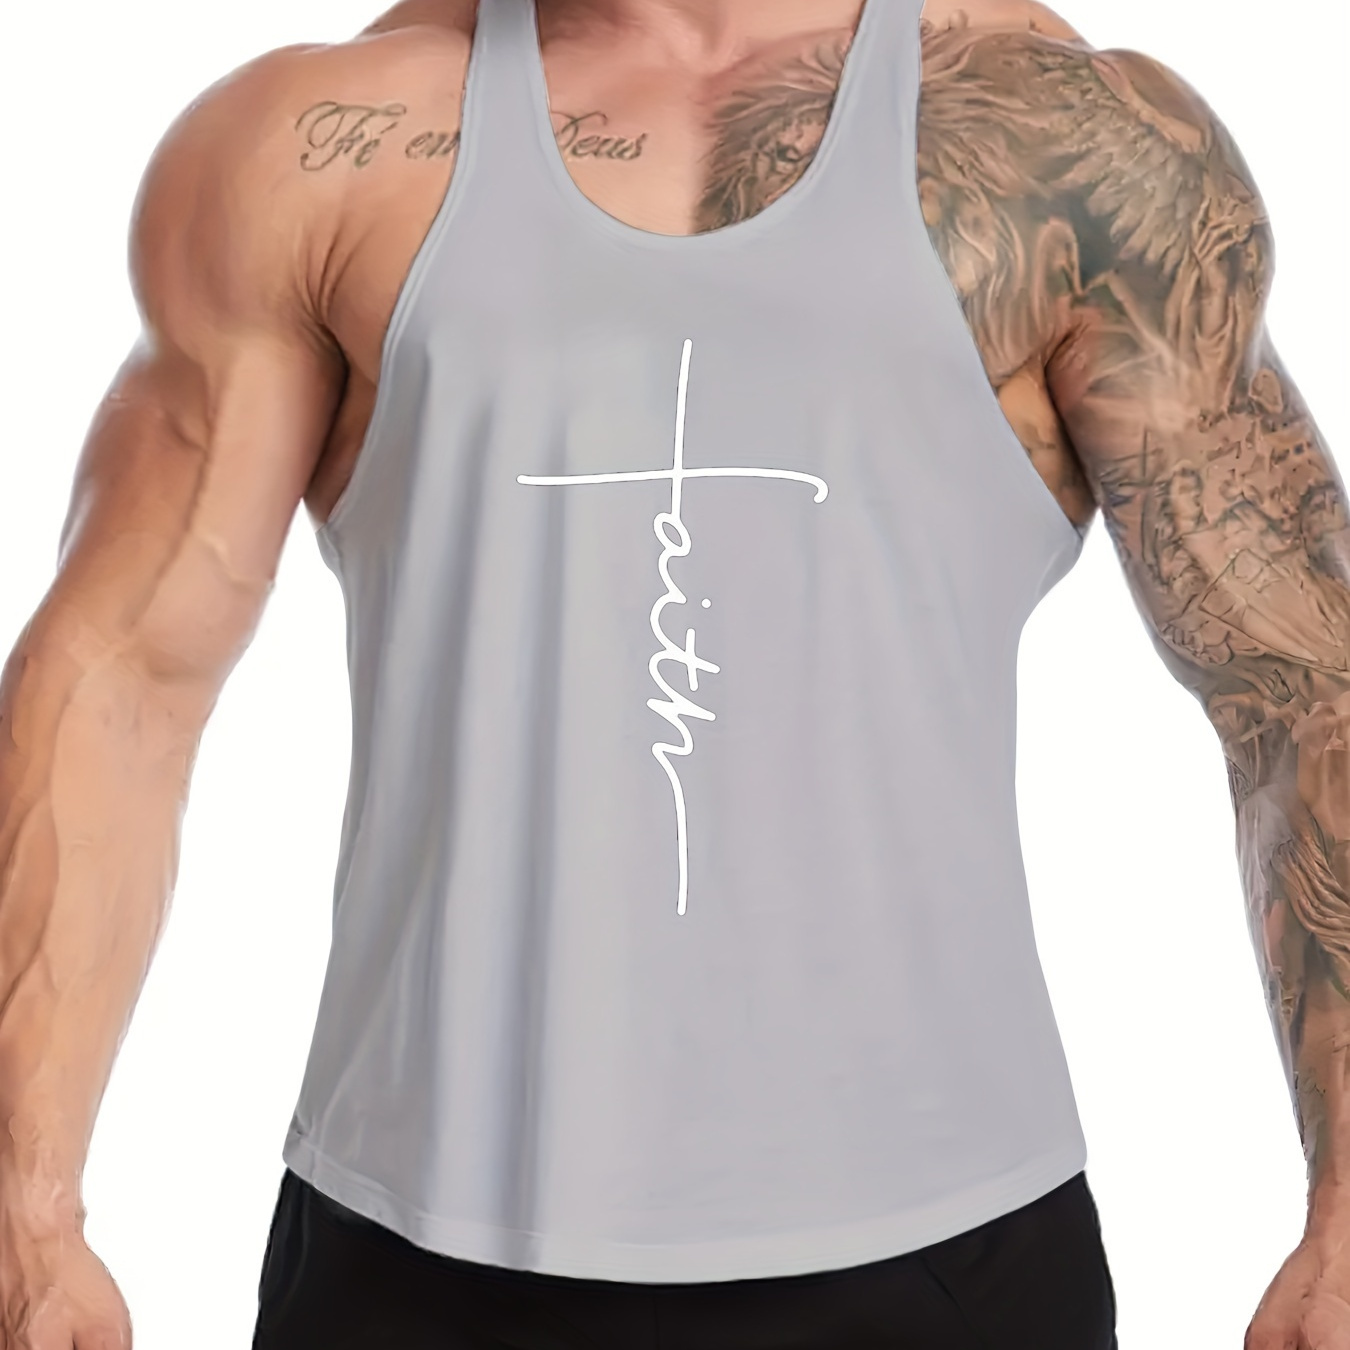 

Faith Letter Print Summer Men's Quick Dry Moisture-wicking Breathable Tank Tops, Athletic Gym Bodybuilding Sports Sleeveless Shirts, For Running Training, Men's Clothing